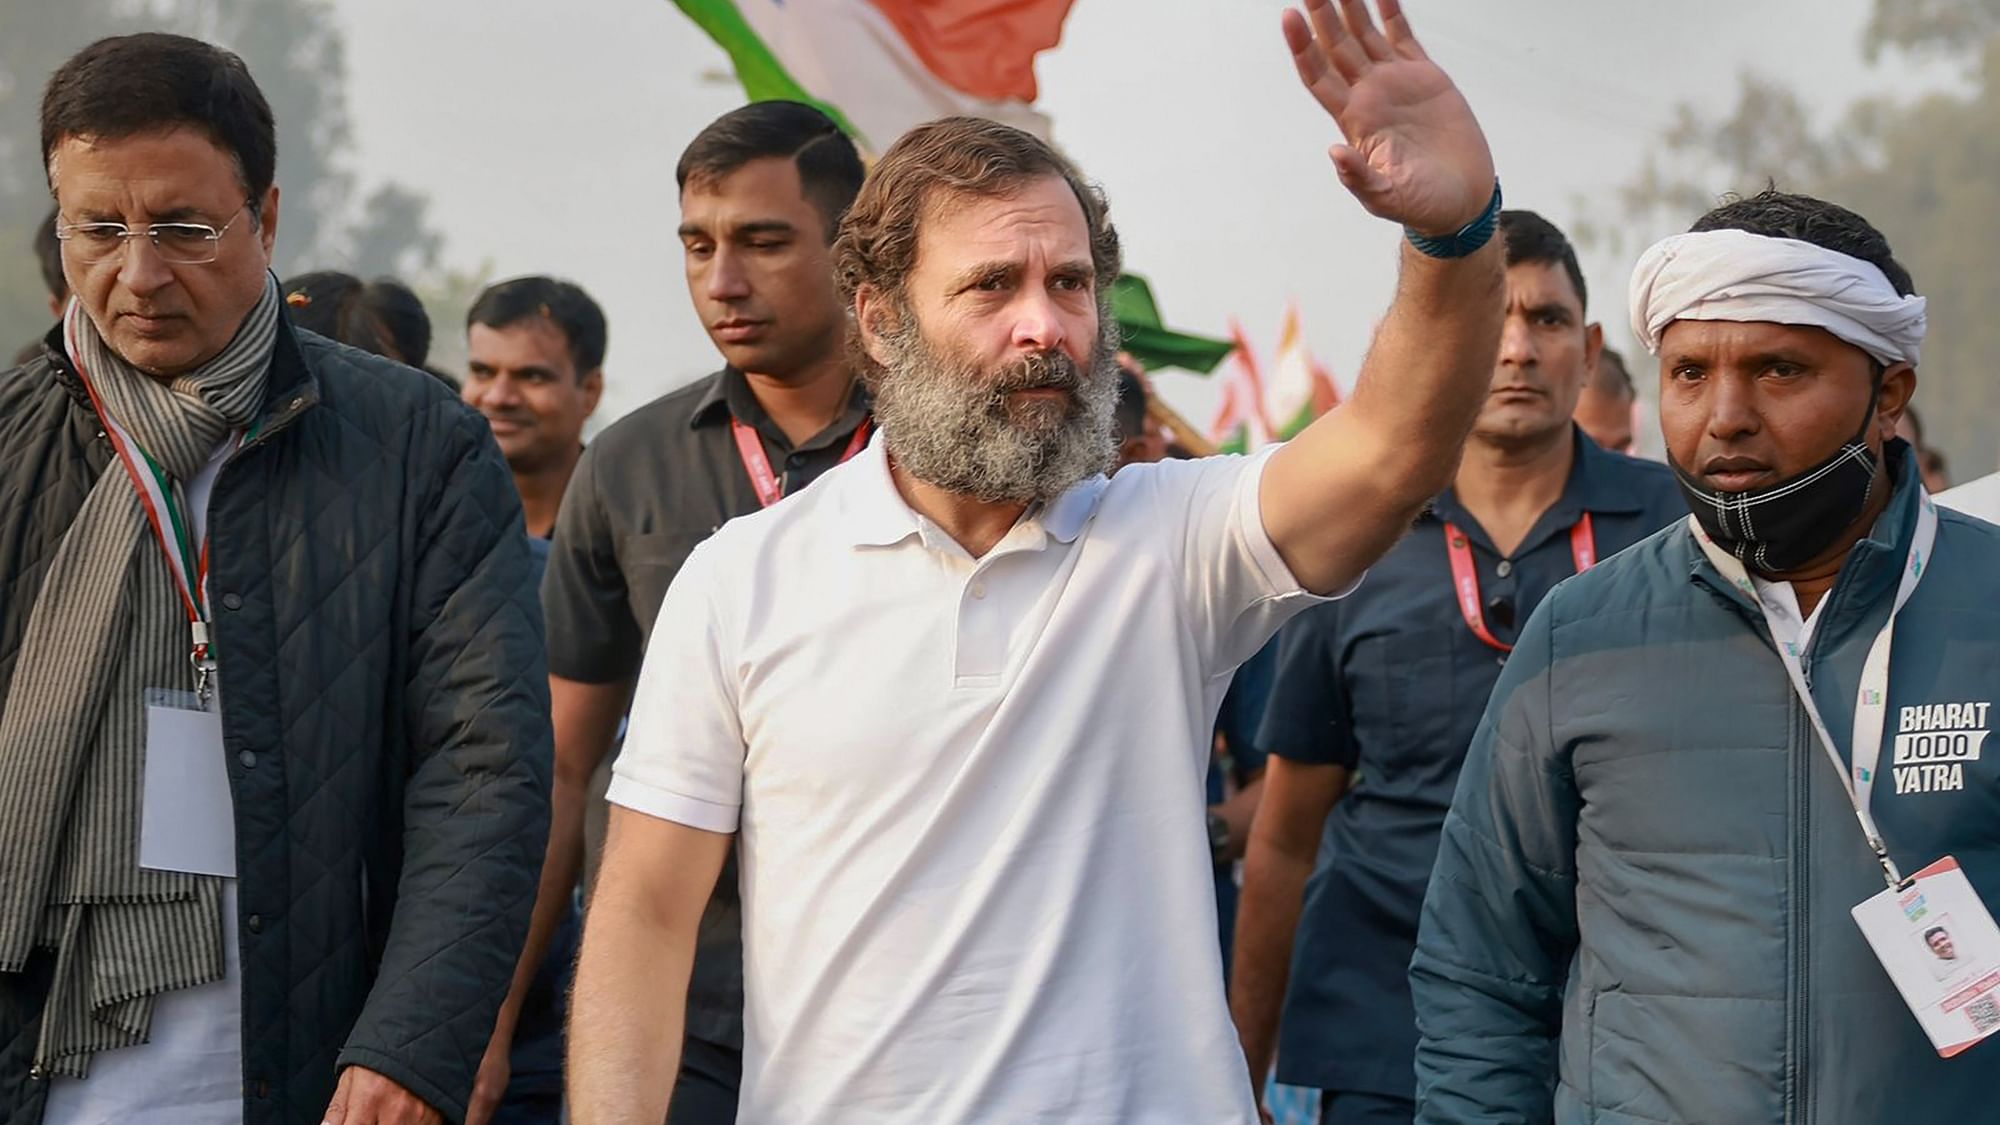 <div class="paragraphs"><p>Nuh: Congress leader Rahul Gandhi waves at supporters during the 'Bharat Jodo Yatra', in Nuh district, Thursday, Dec. 22, 2022. Congress leader Randeep Surjewala is also seen.</p></div>